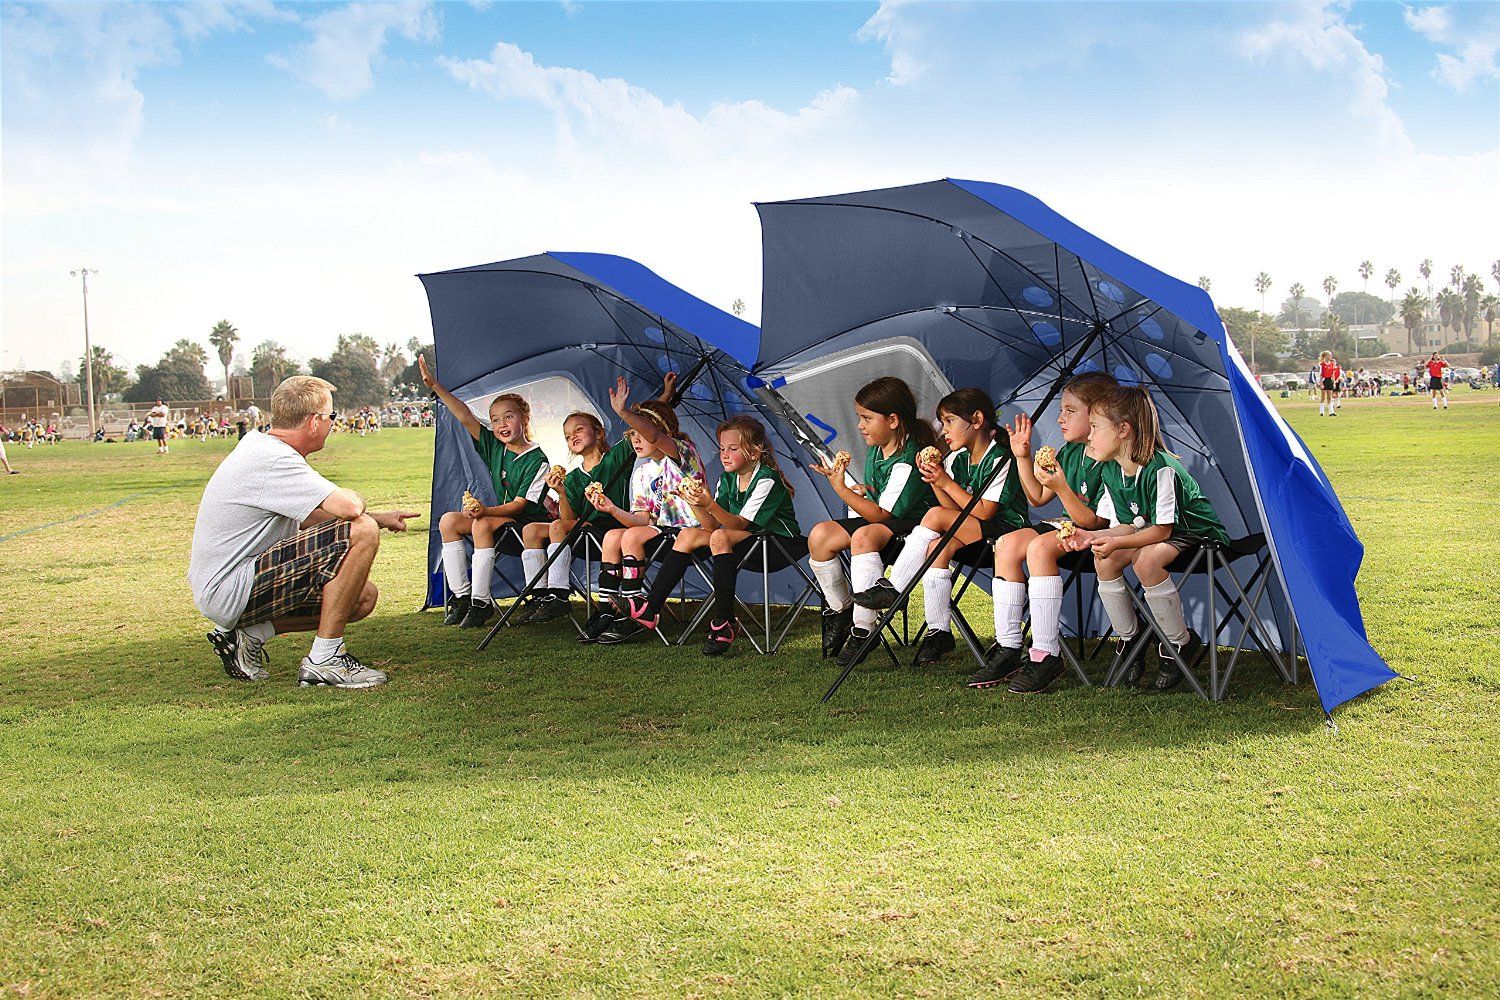 The Best Beach Umbrellas: The Sport-Brella is a tent-umbrella hybrid, great for larger families